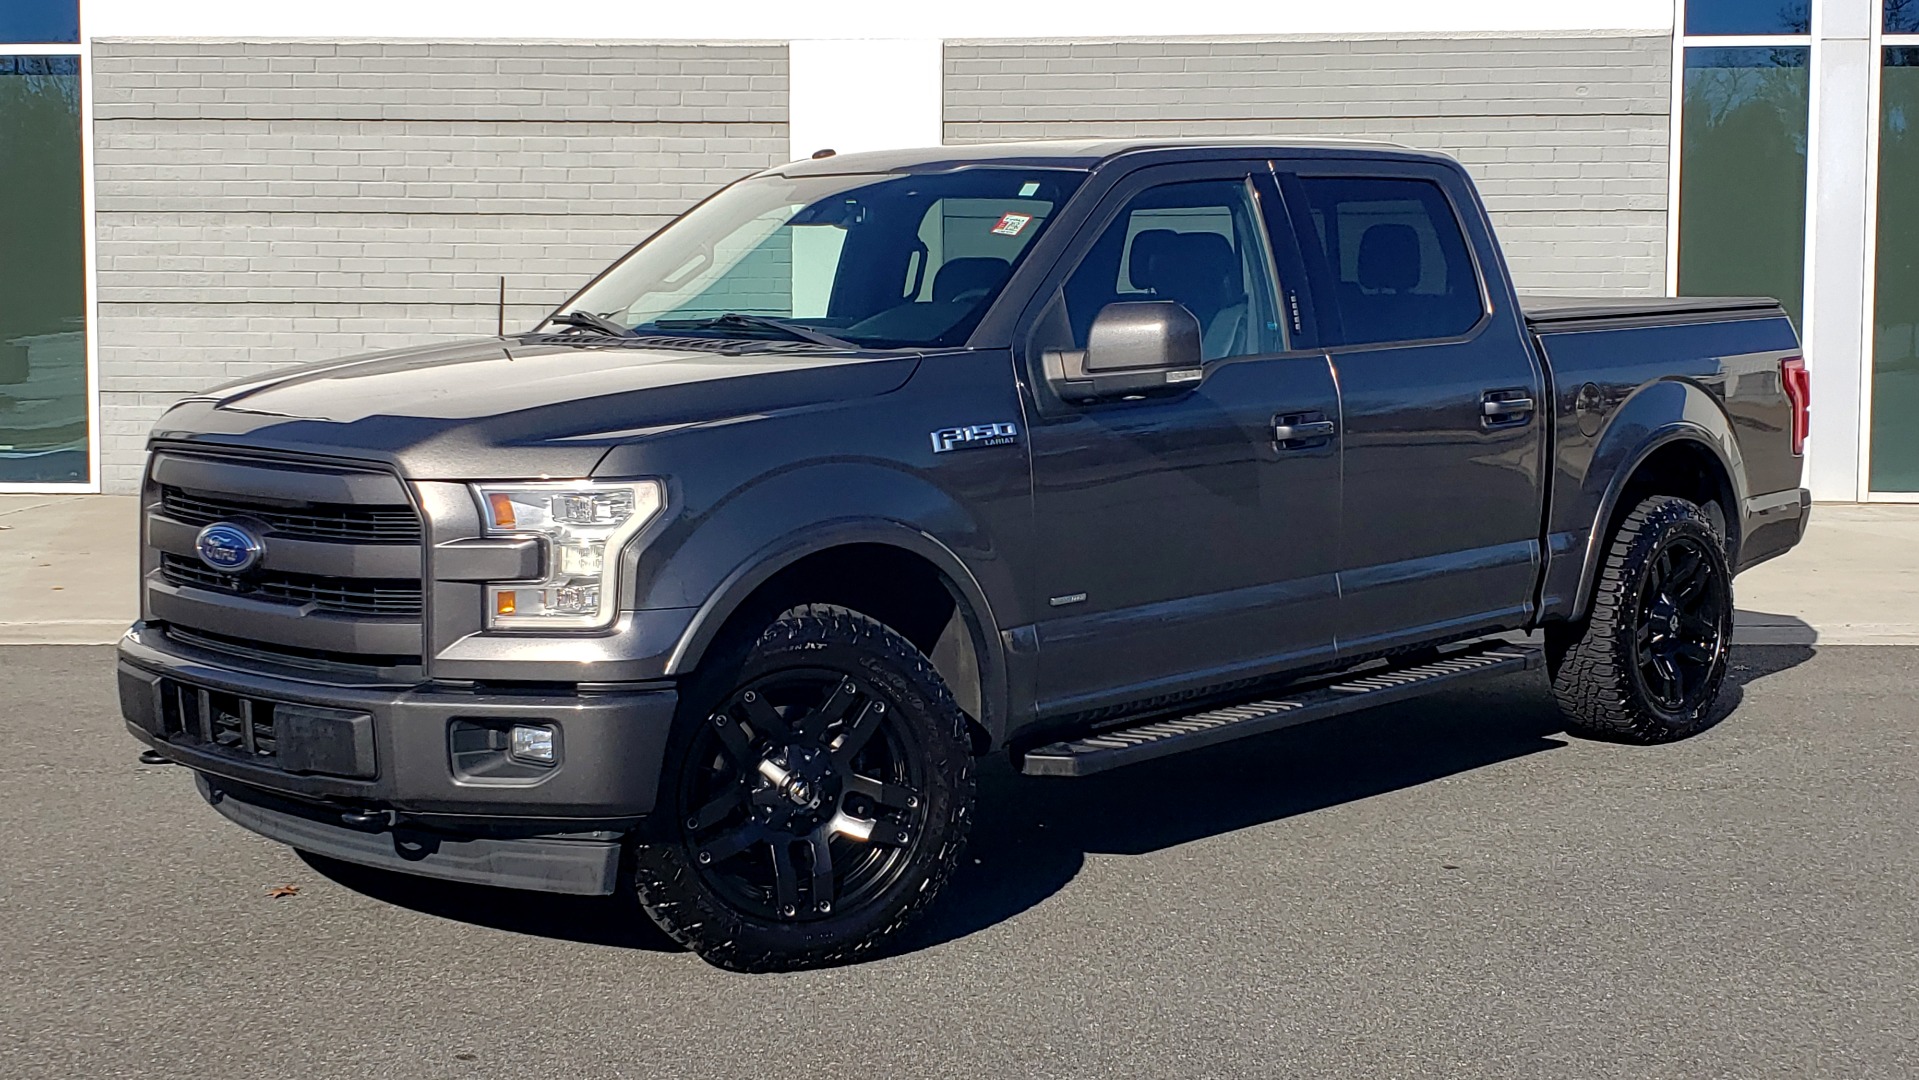 Used 2017 Ford F-150 LARIAT 4X4 SUPERCREW / 3.5L ECOBOOST / 10-SPD AUTO / NAV / SONY / REARVIEW for sale Sold at Formula Imports in Charlotte NC 28227 1